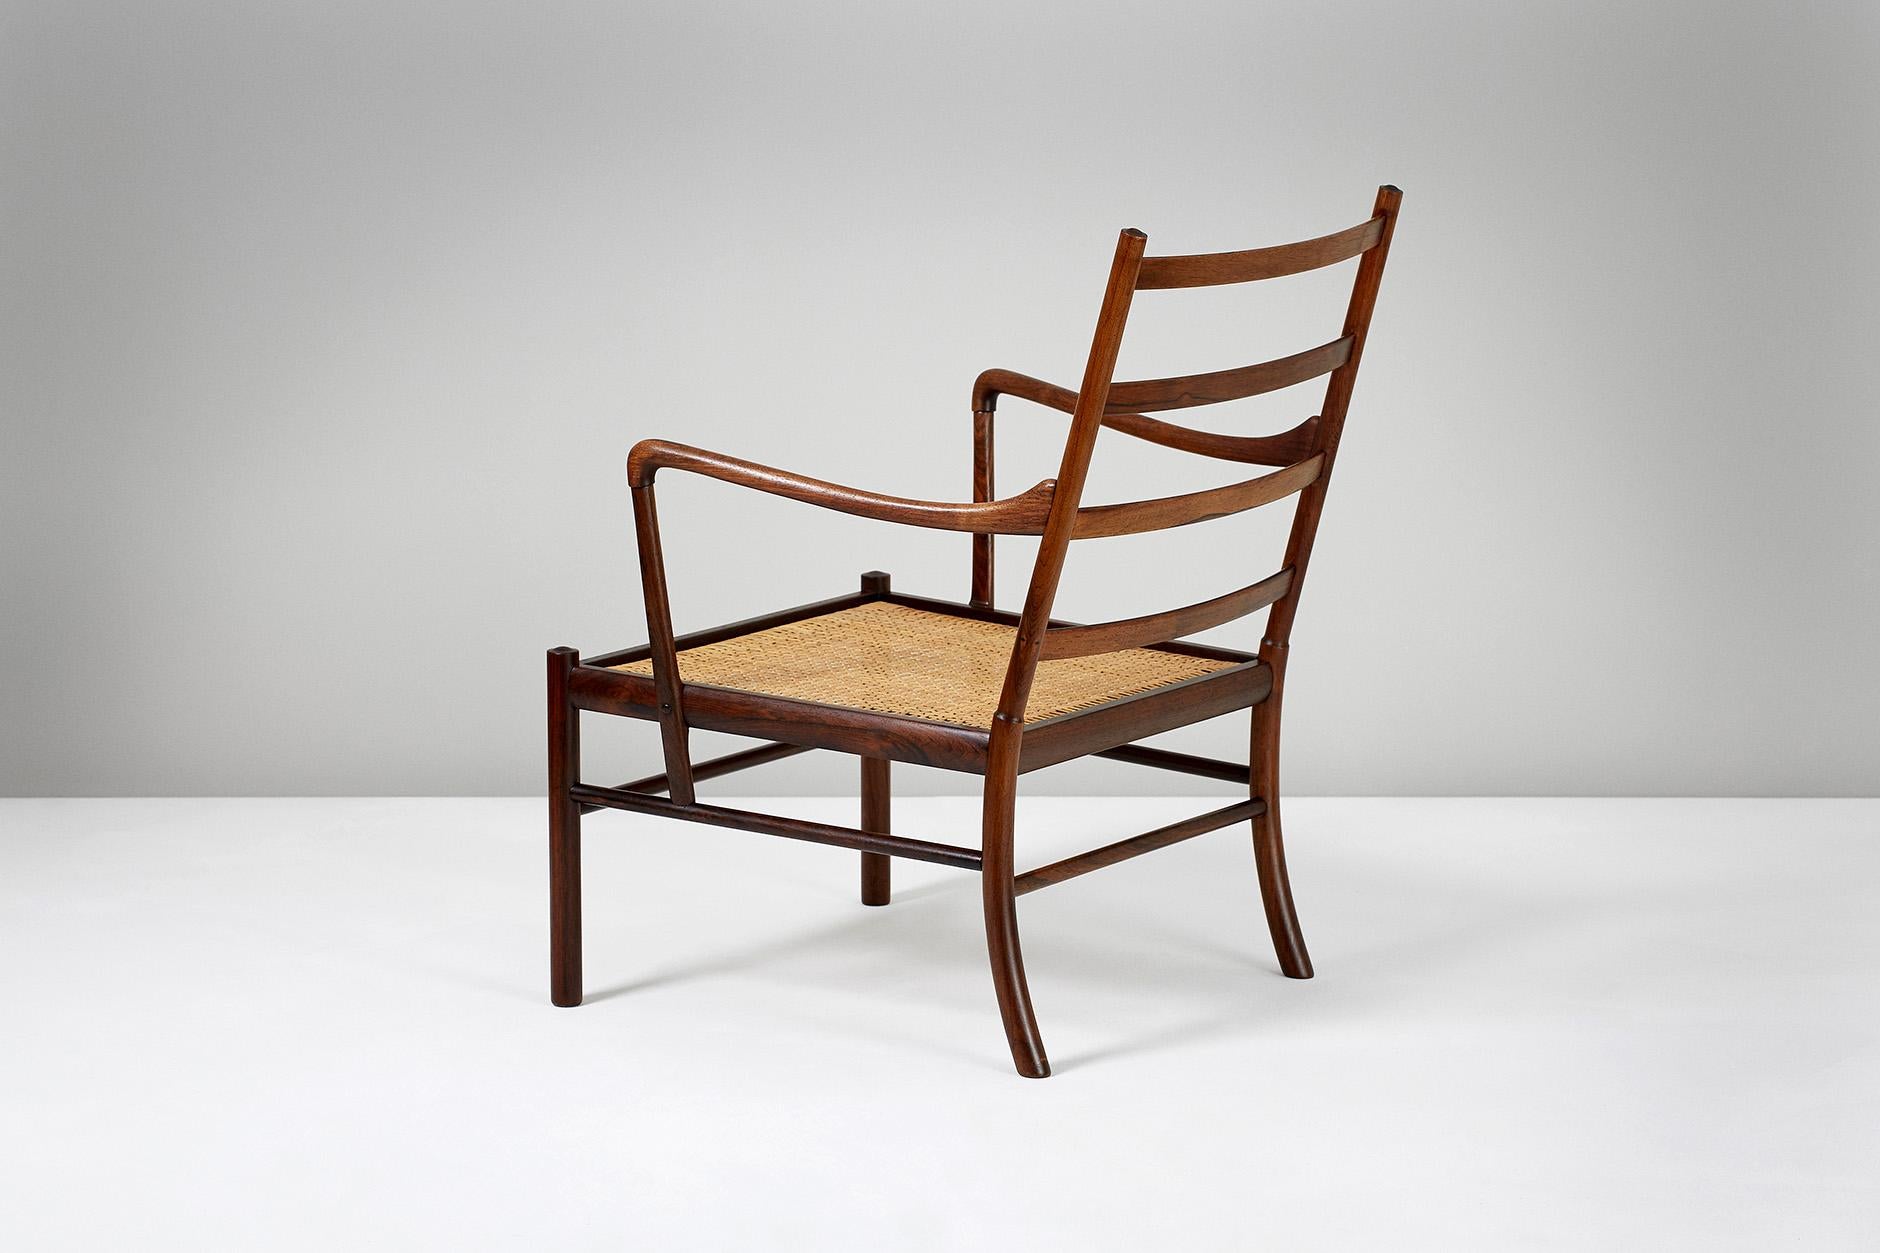 Ole Wanscher

PJ-149 colonial chair, 1949

The colonial chair is one of Wanscher’s best loved and most iconic designs, drawing influence from British and French colonial furniture of the 18th-19th centuries. Produced by Poul Jeppesen, this